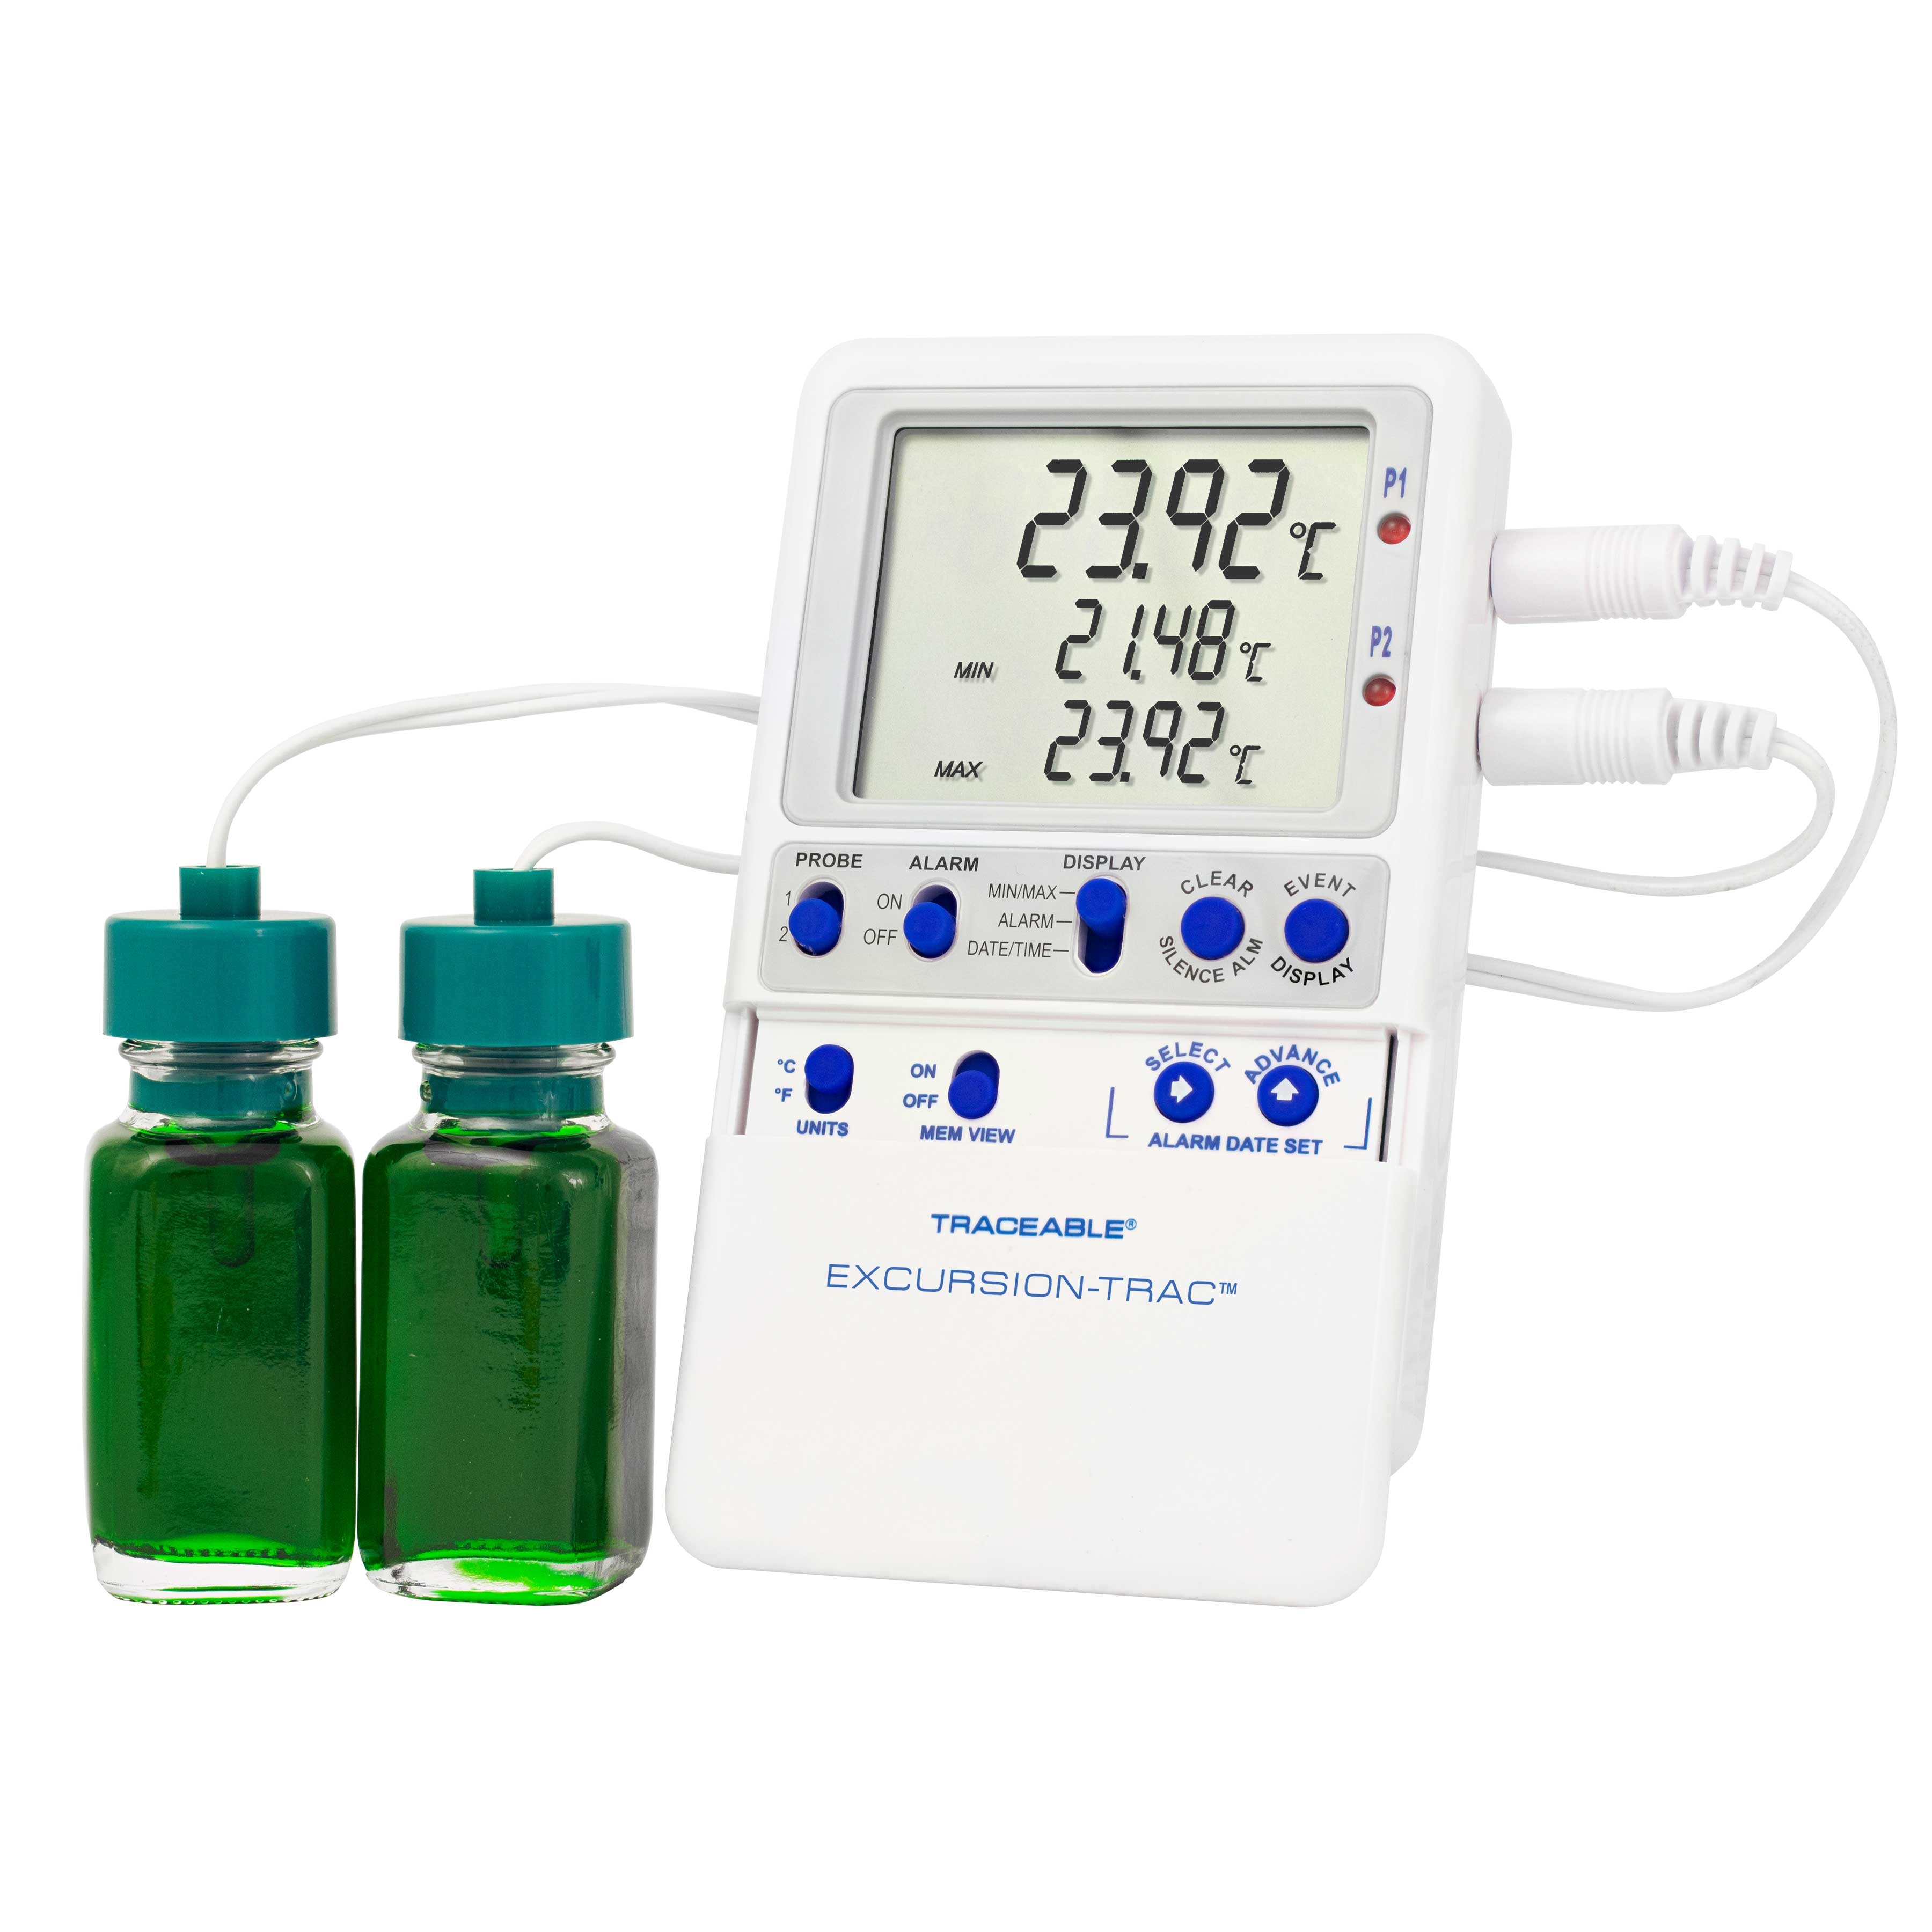 Excursion-Trac datalogging digital thermometer. TRACEABLE. Range: –50.00 to 70.00°C. Accuracy: ±0.25°C. Resolution: 0.01°C. Probes: 2 bottles. Application: Refrigerators and Freezers